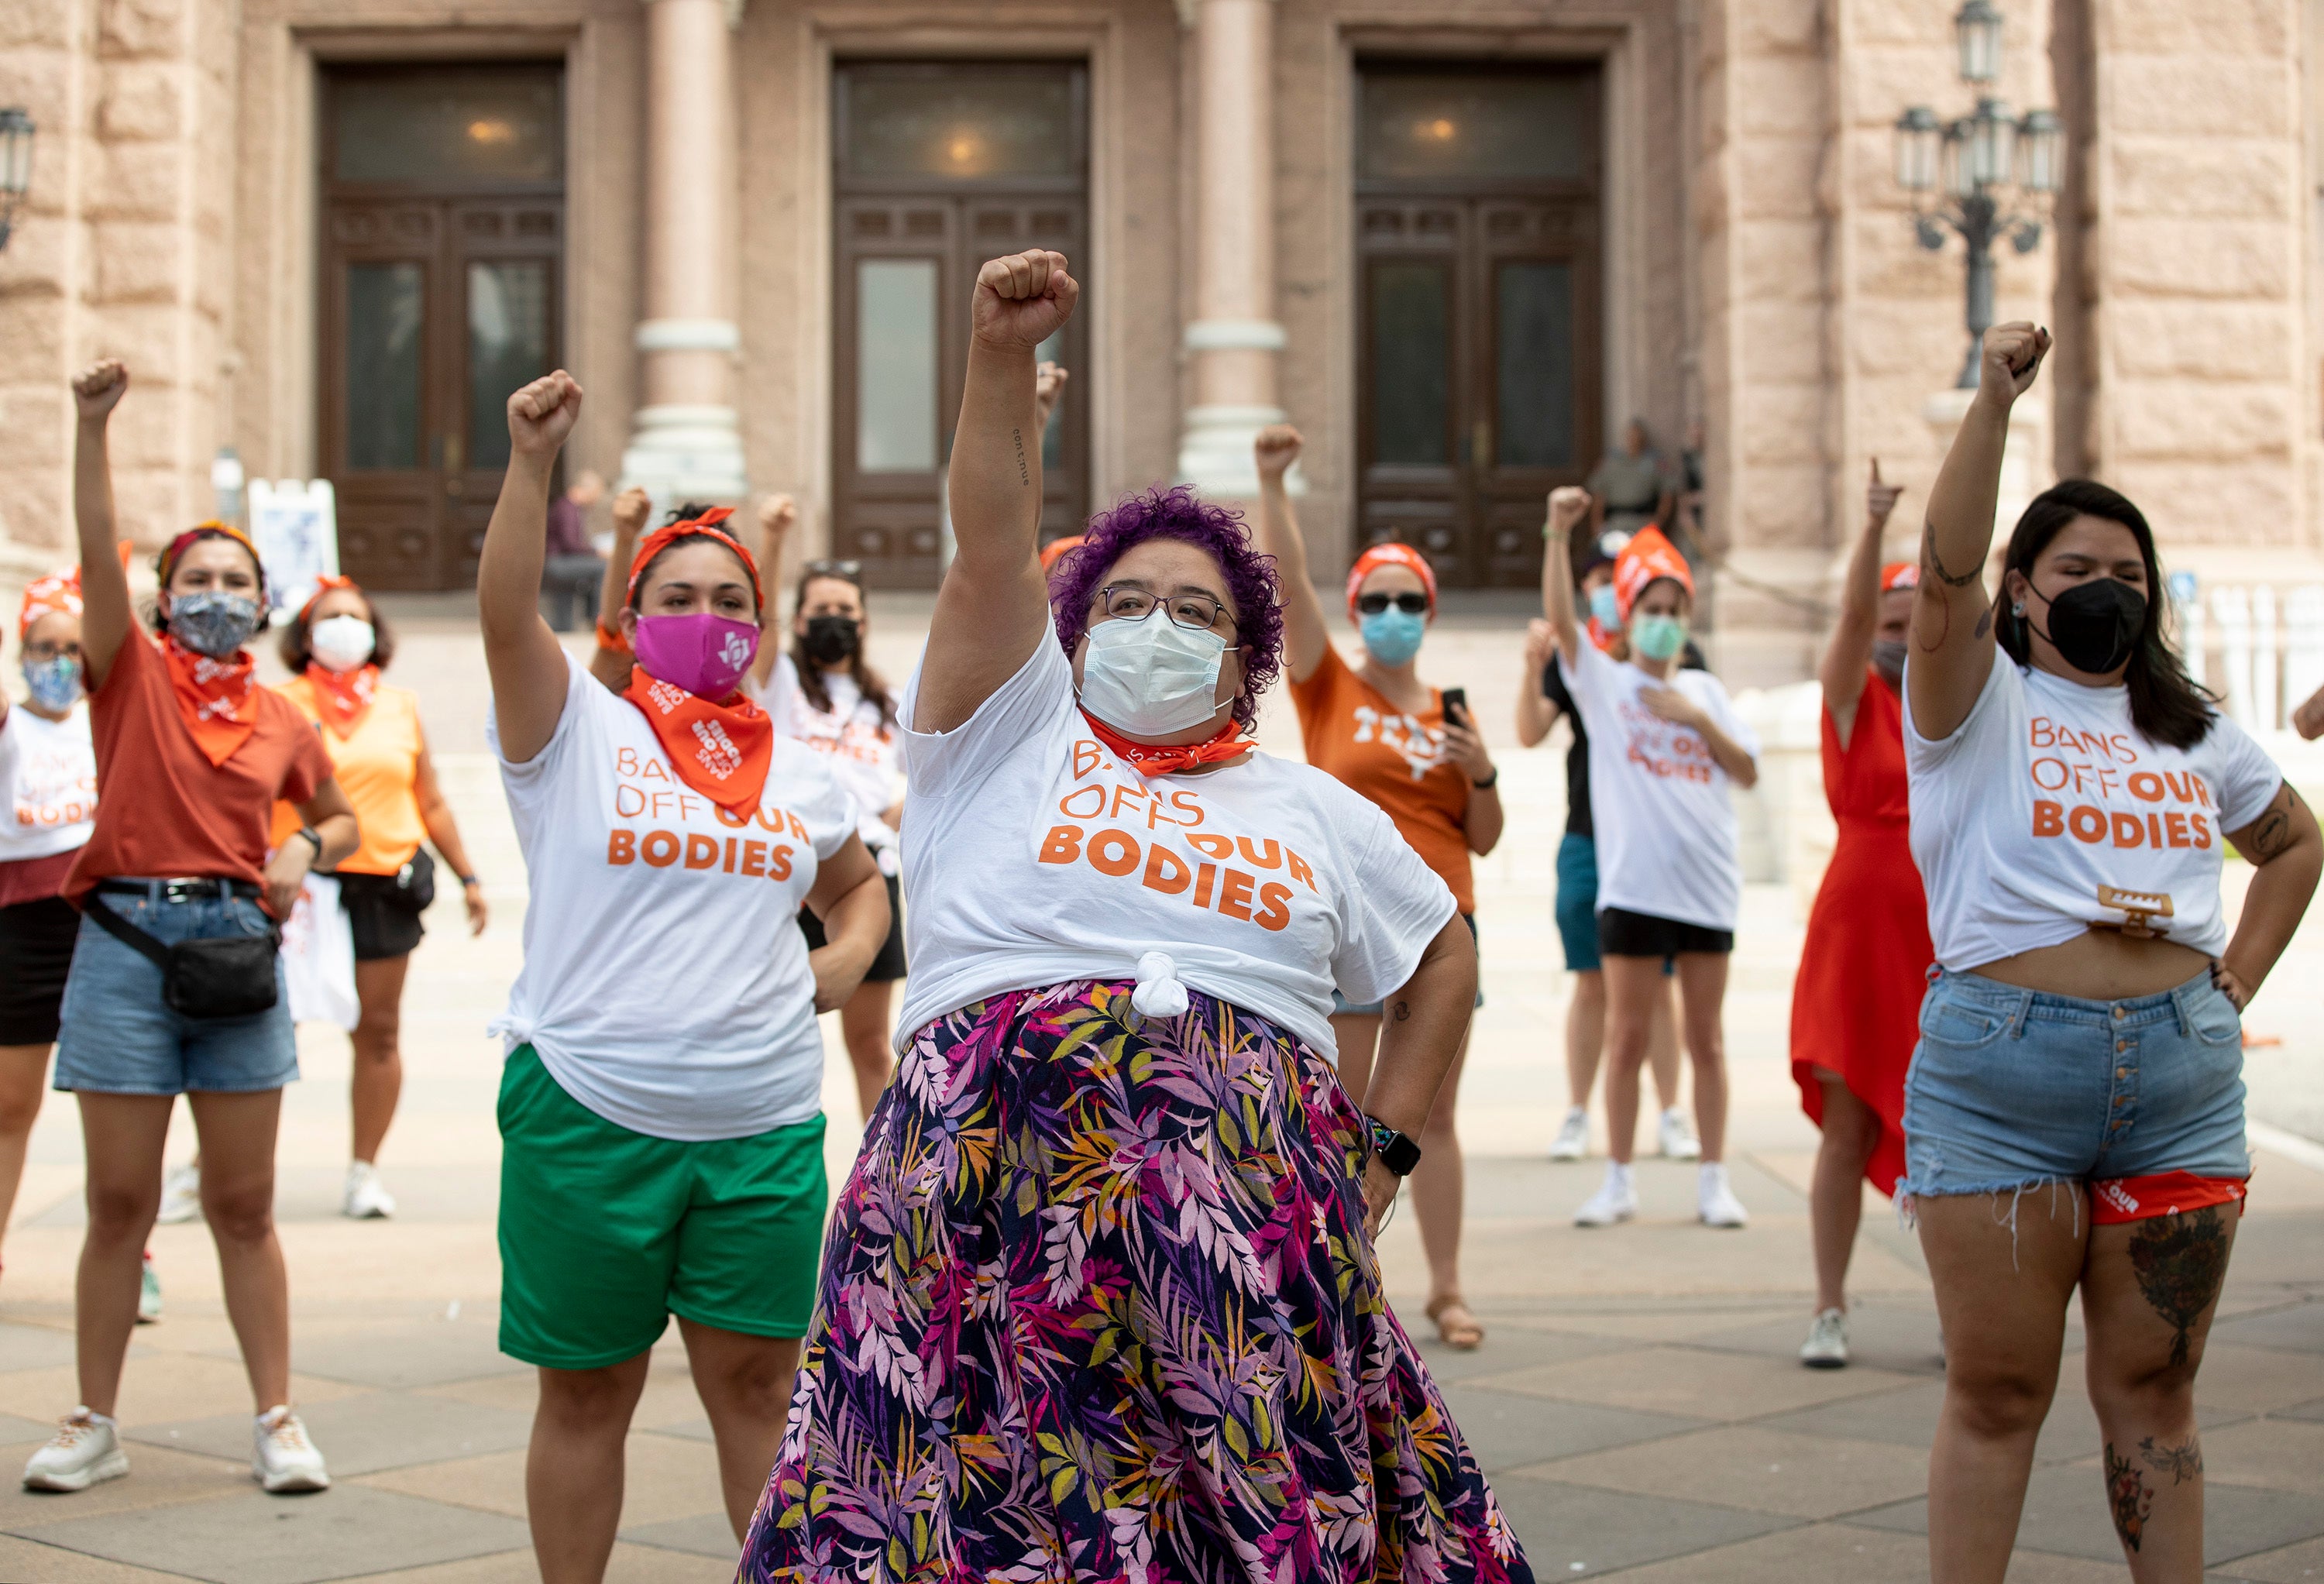 Abortion rights protesters outside of Texas’s state capital